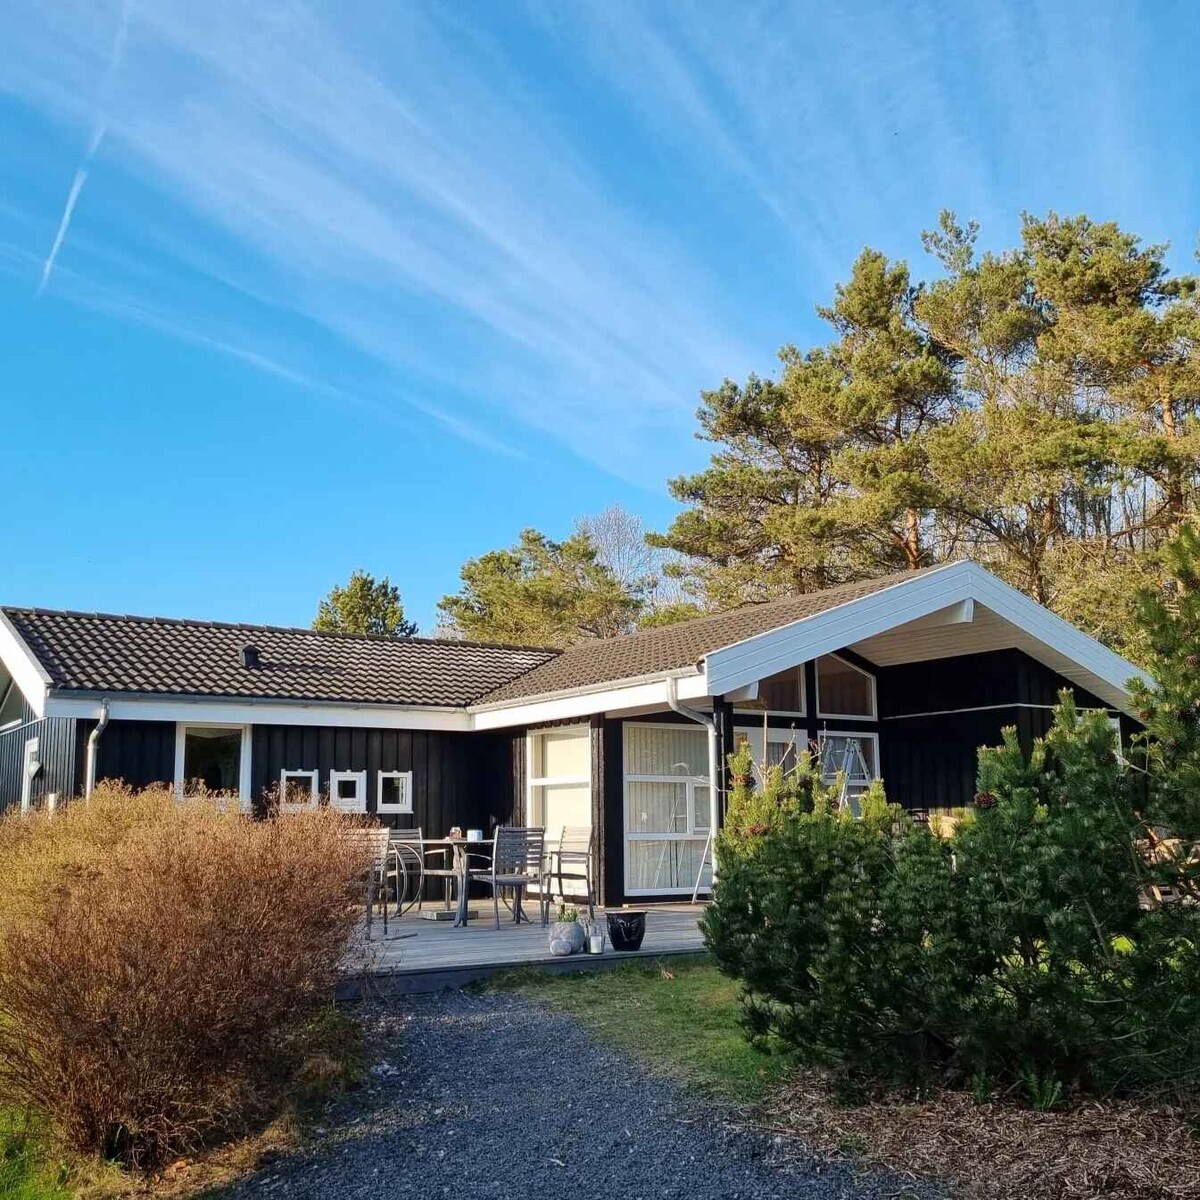 Excellent cottage with sauna and spa, 10 persons.